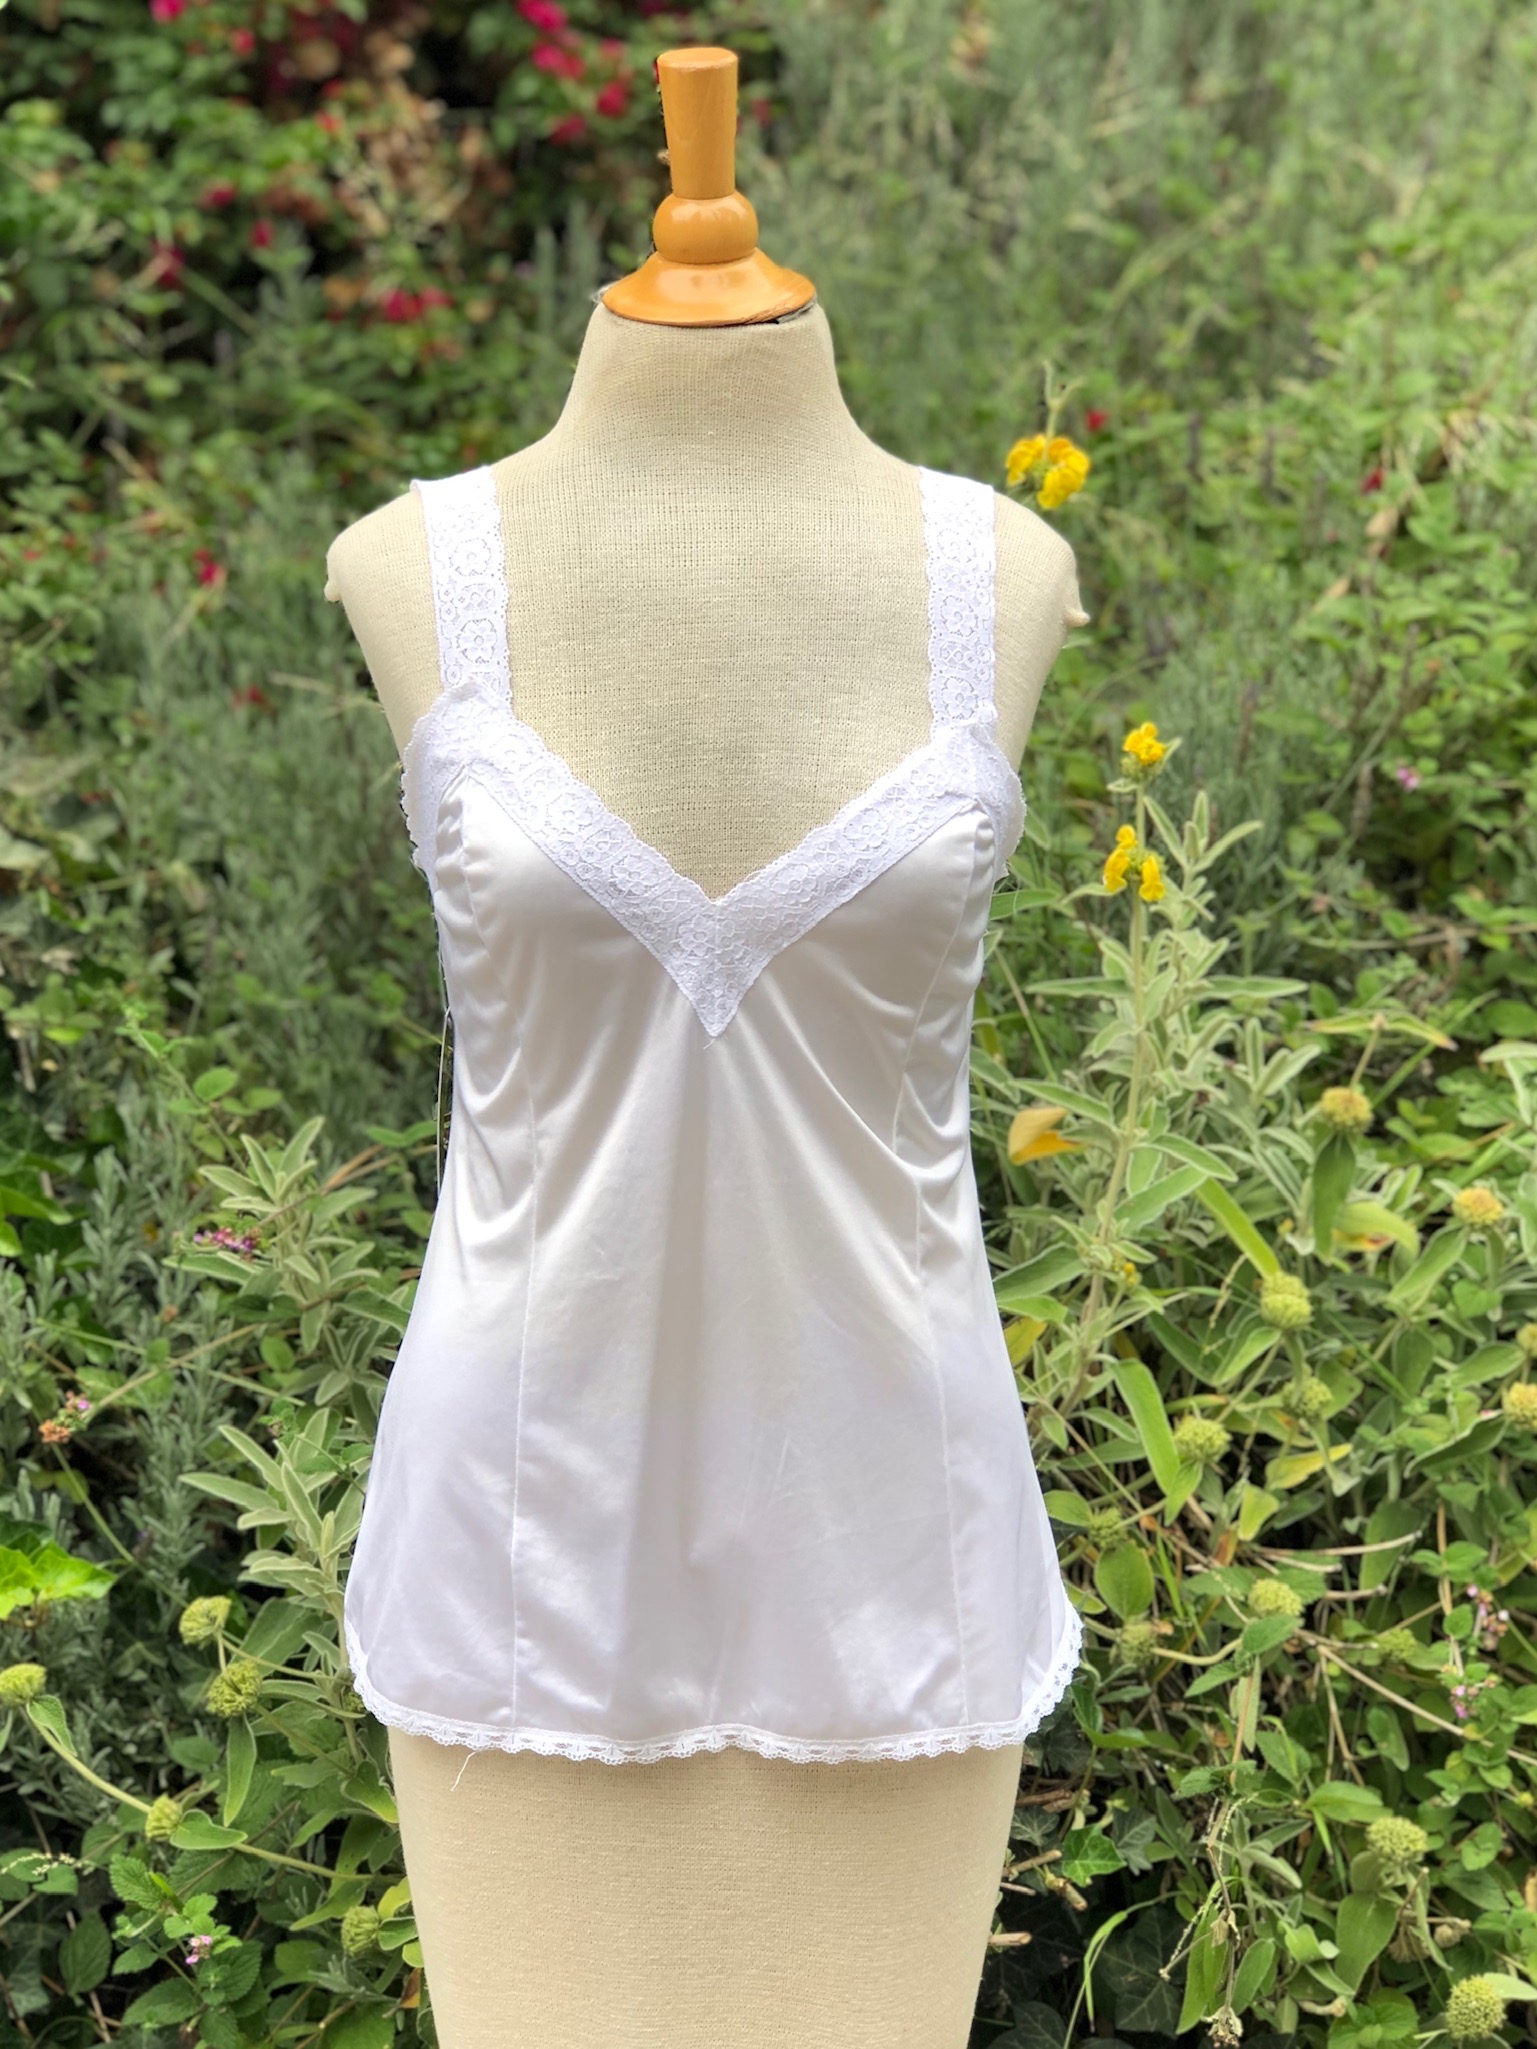 72 Wholesale Sofra Ladies 21 Camisole White - at 